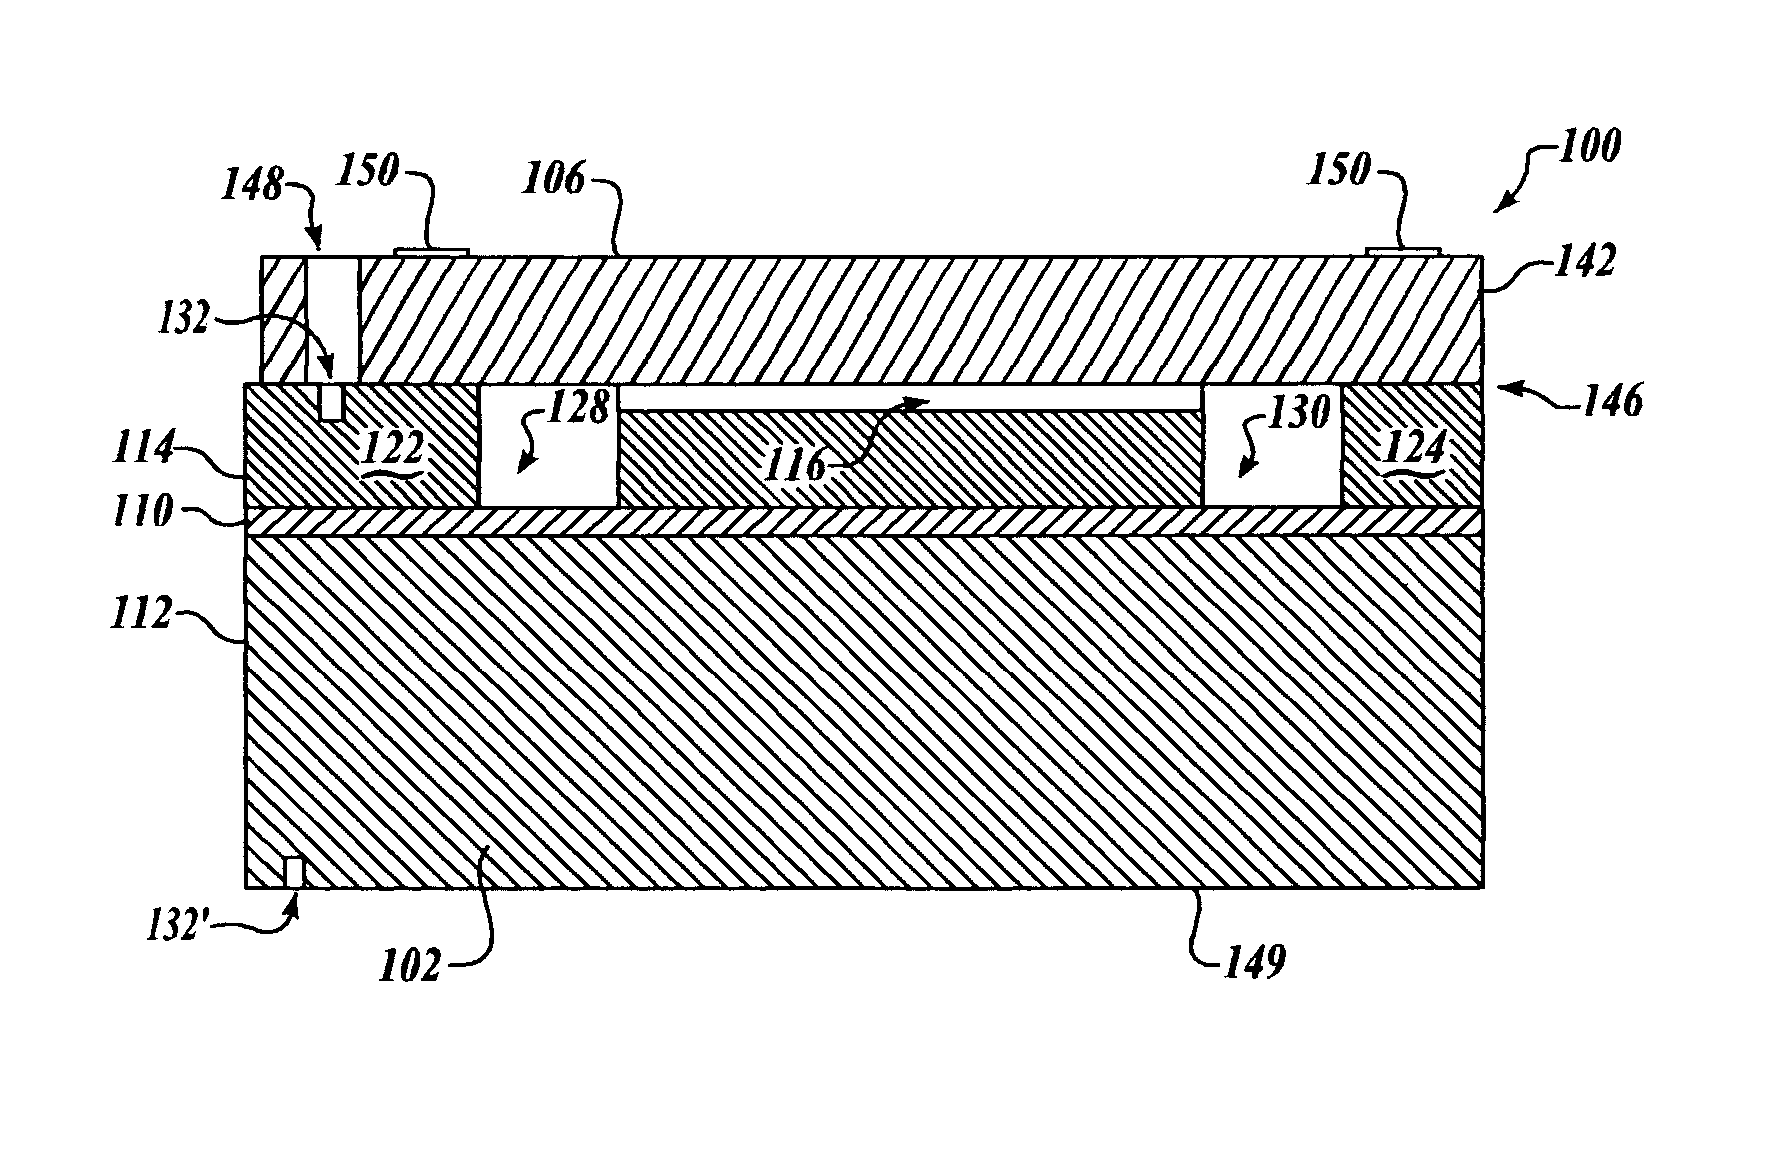 Method of manufacturing vibrating micromechanical structures